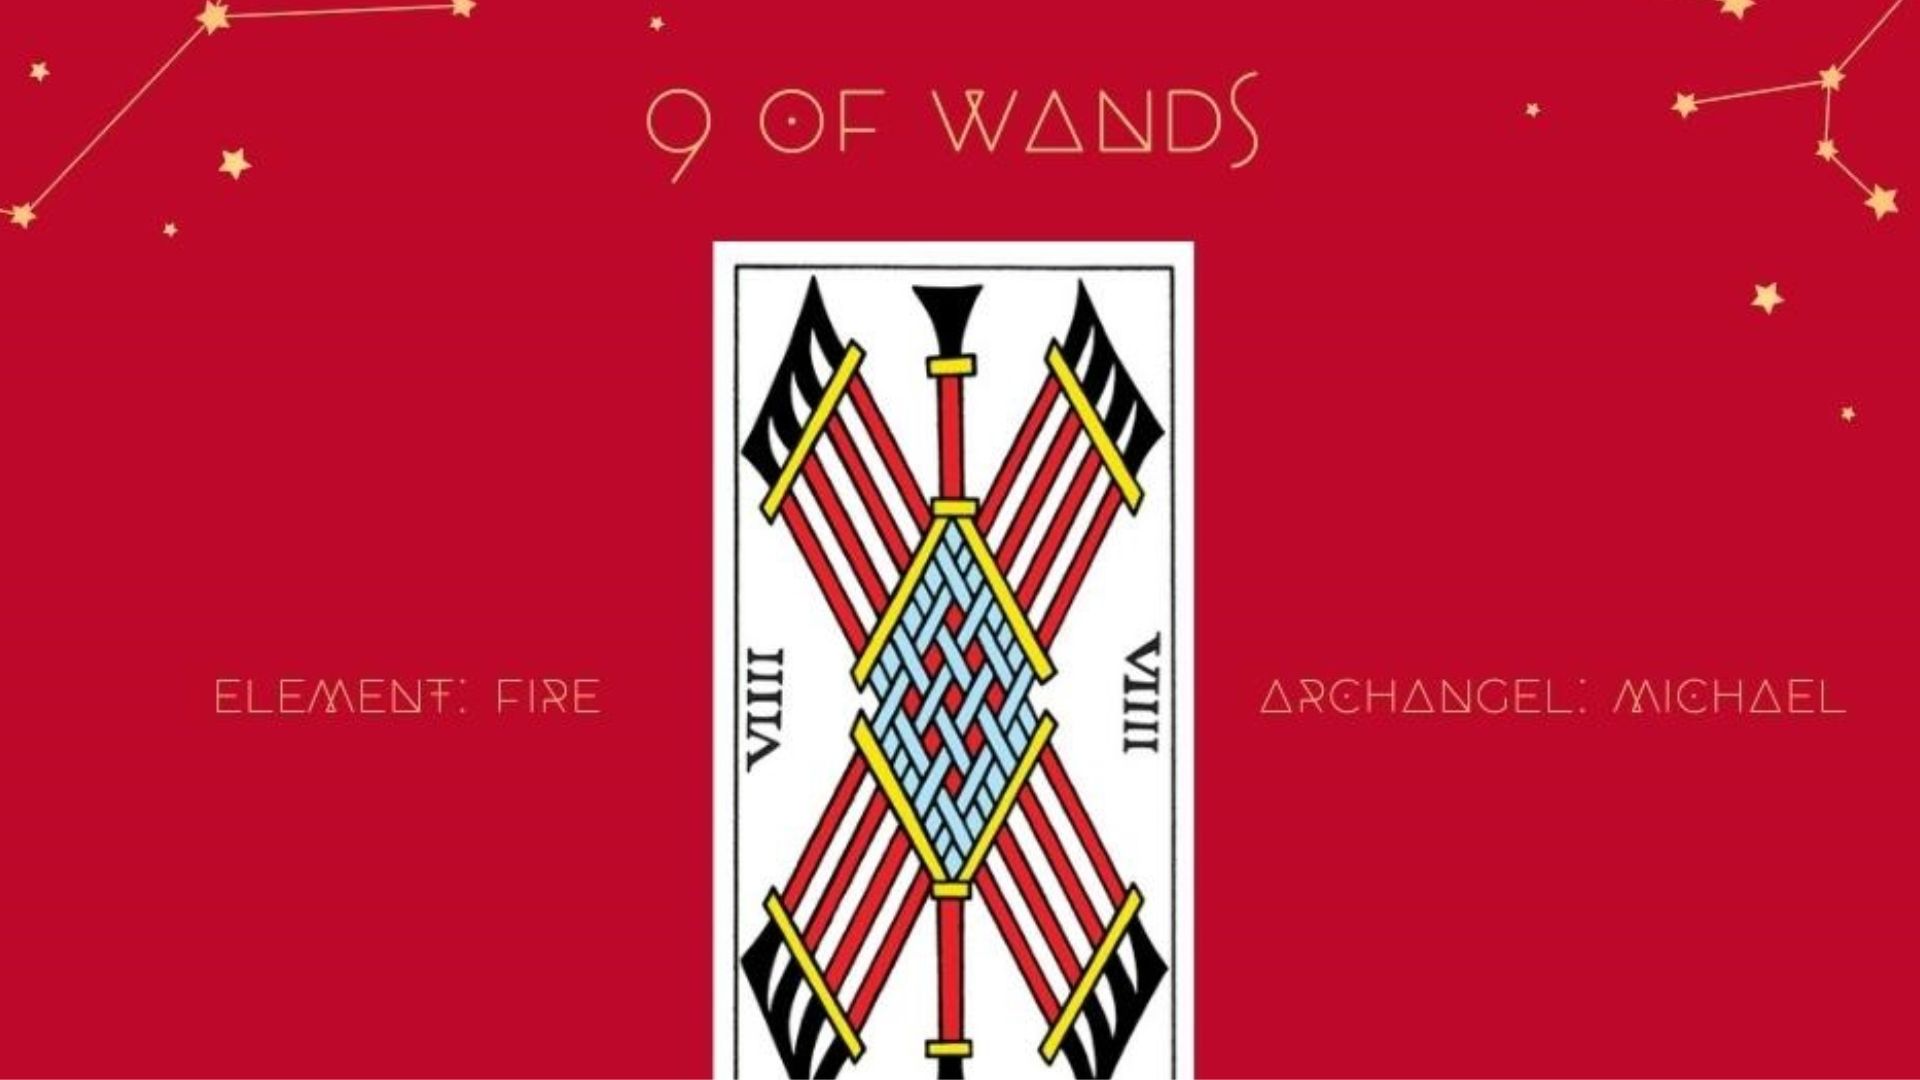 9 of Wands Tarot Card In Red Background